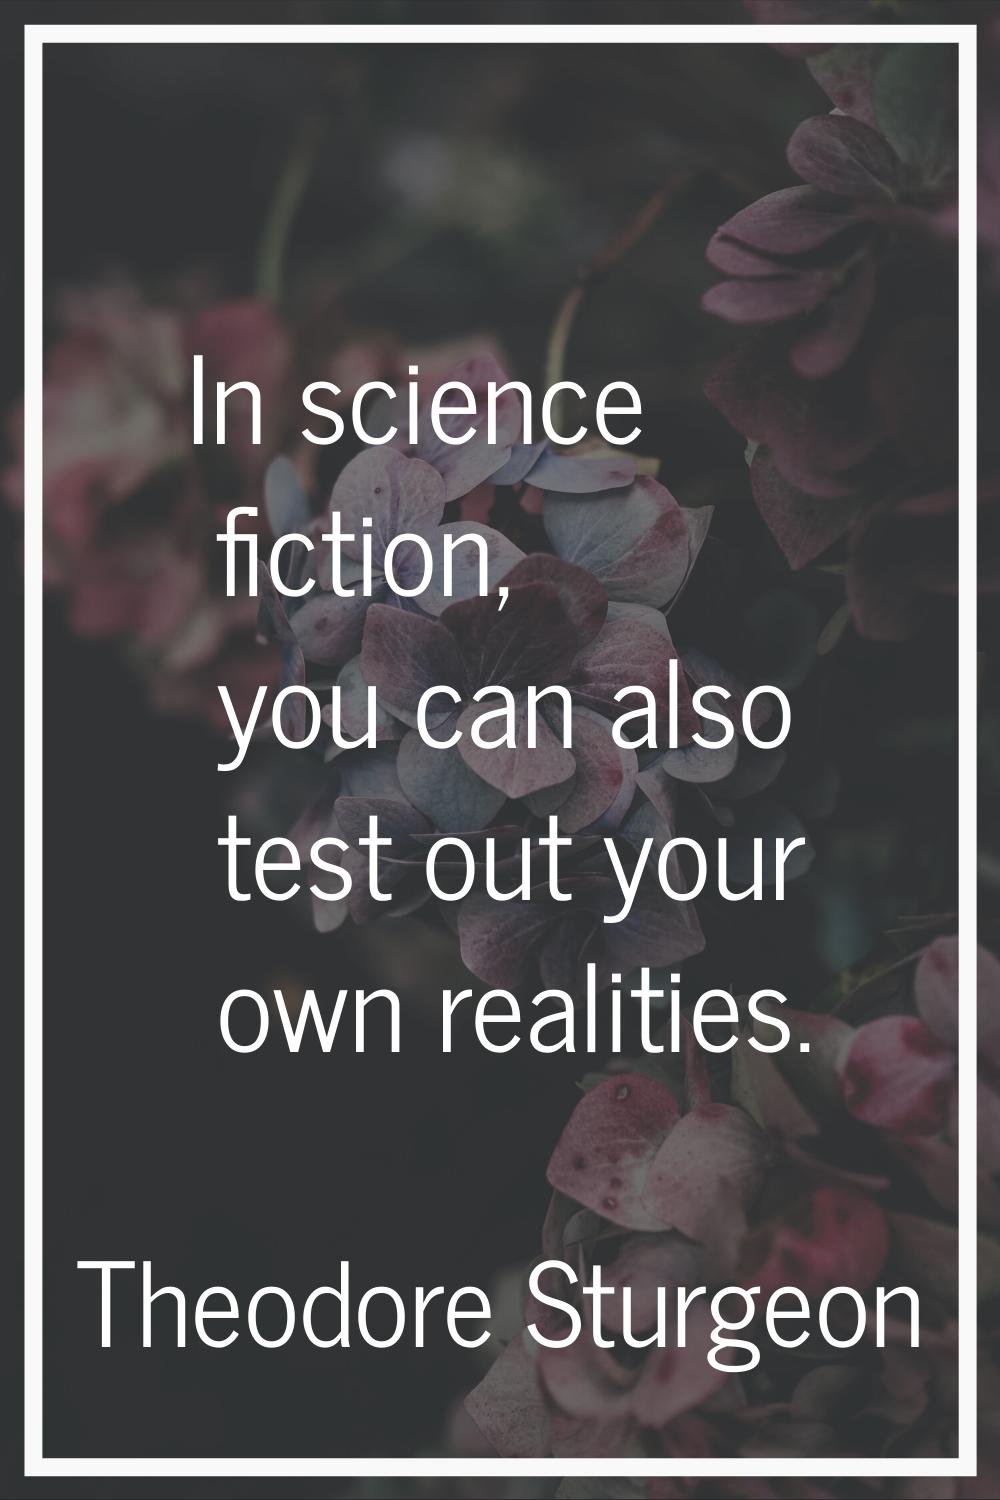 In science fiction, you can also test out your own realities.